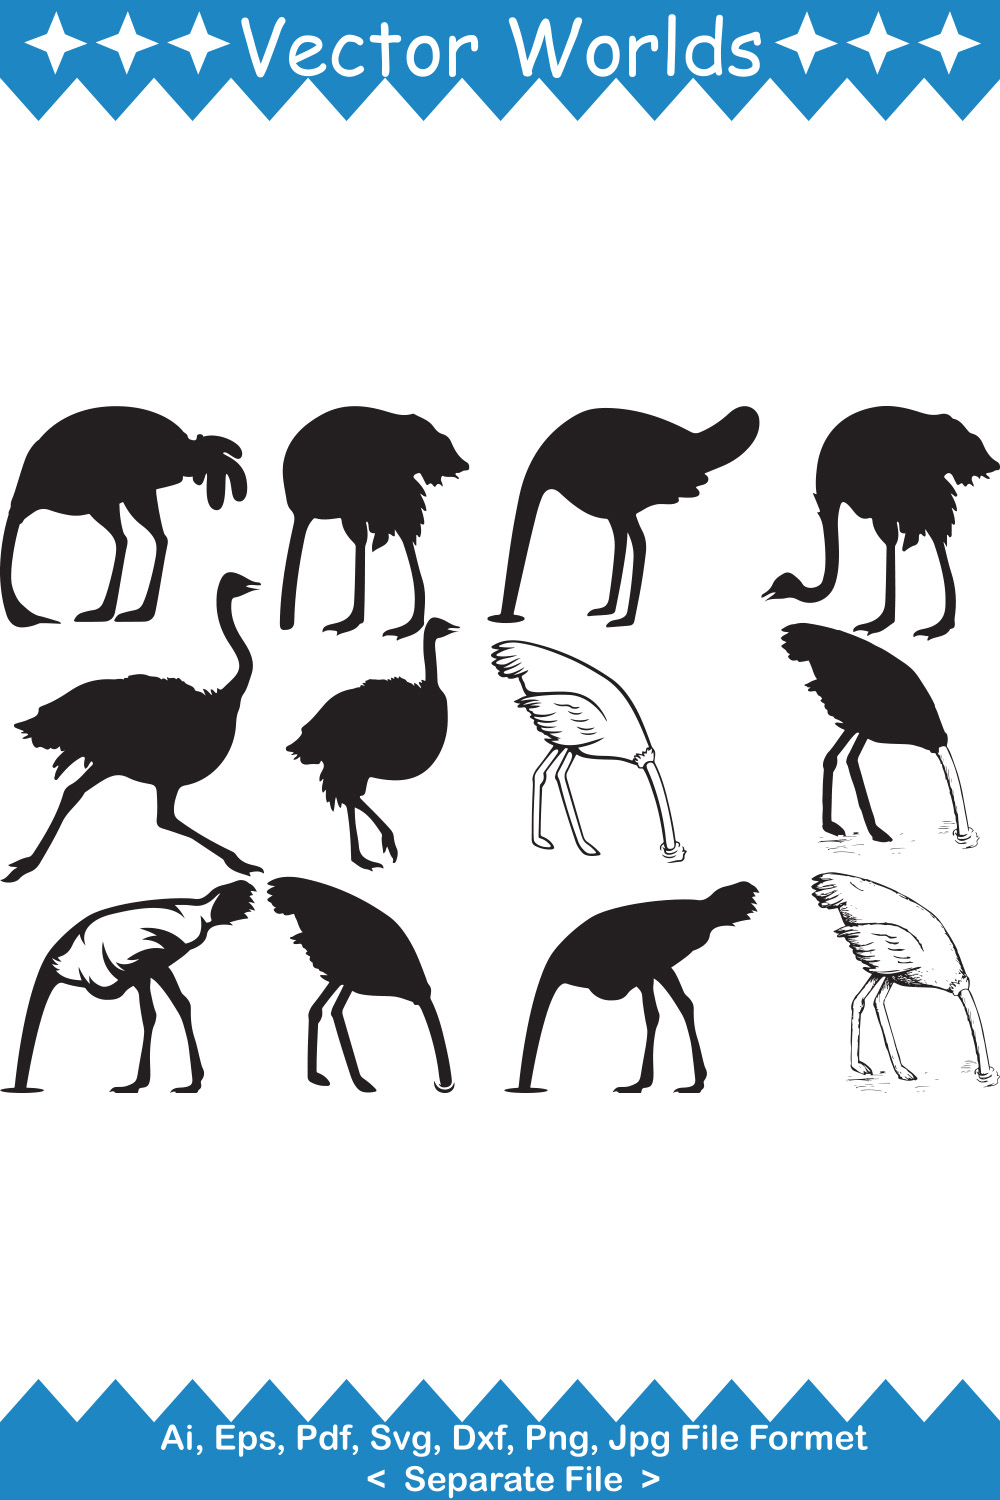 Ostrich silhouettes are shown in black and white.